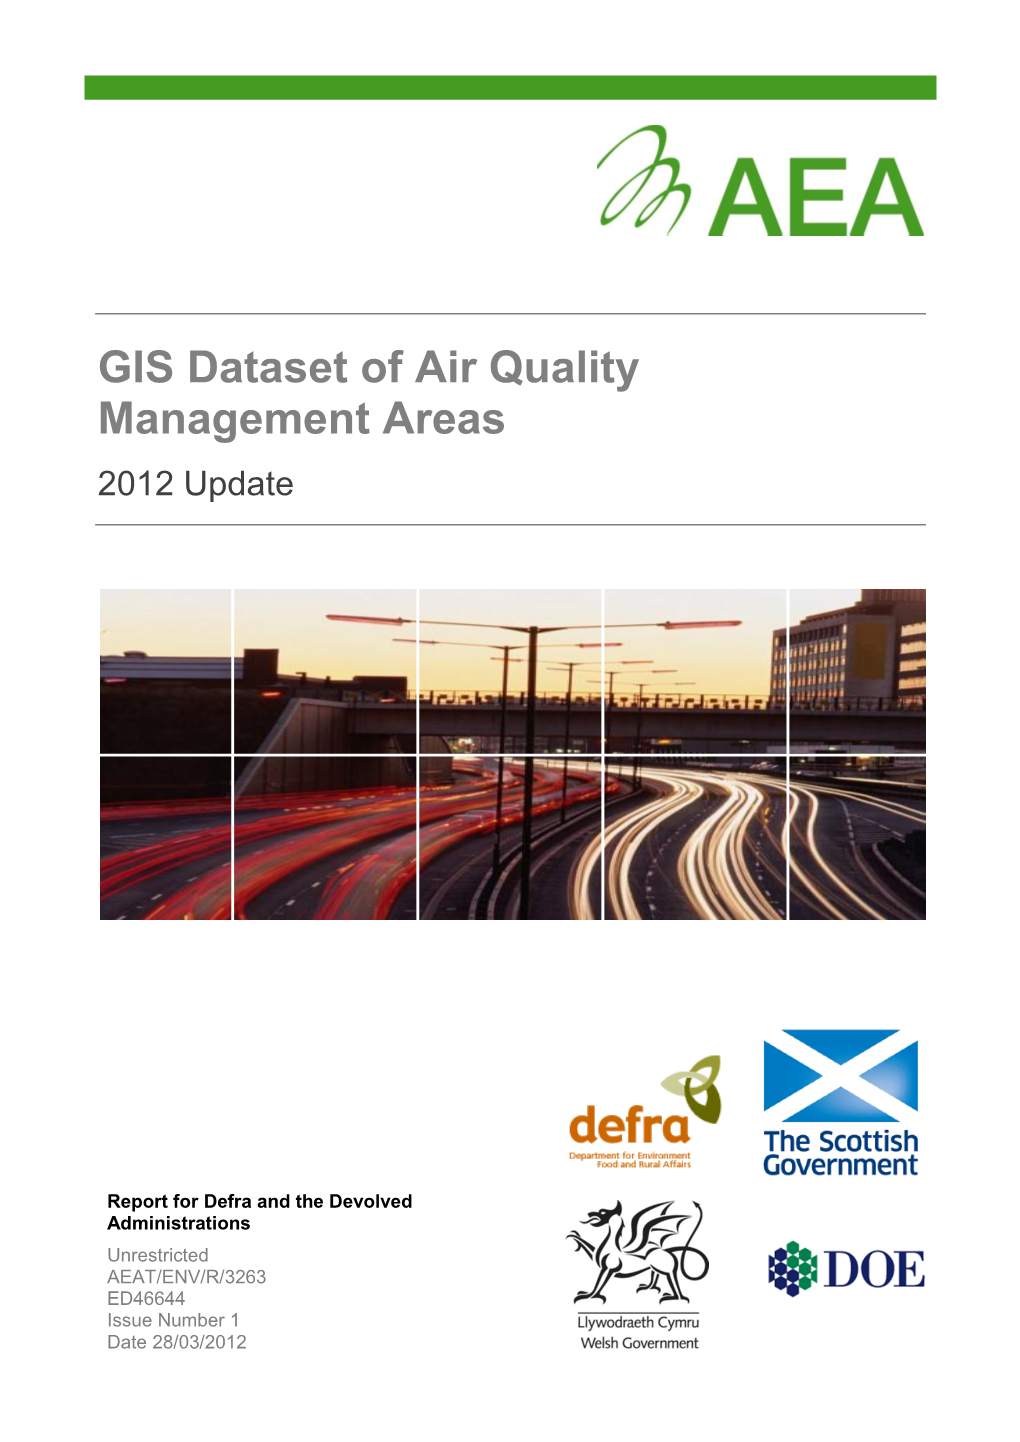 GIS Dataset of Air Quality Management Areas 2012 Update